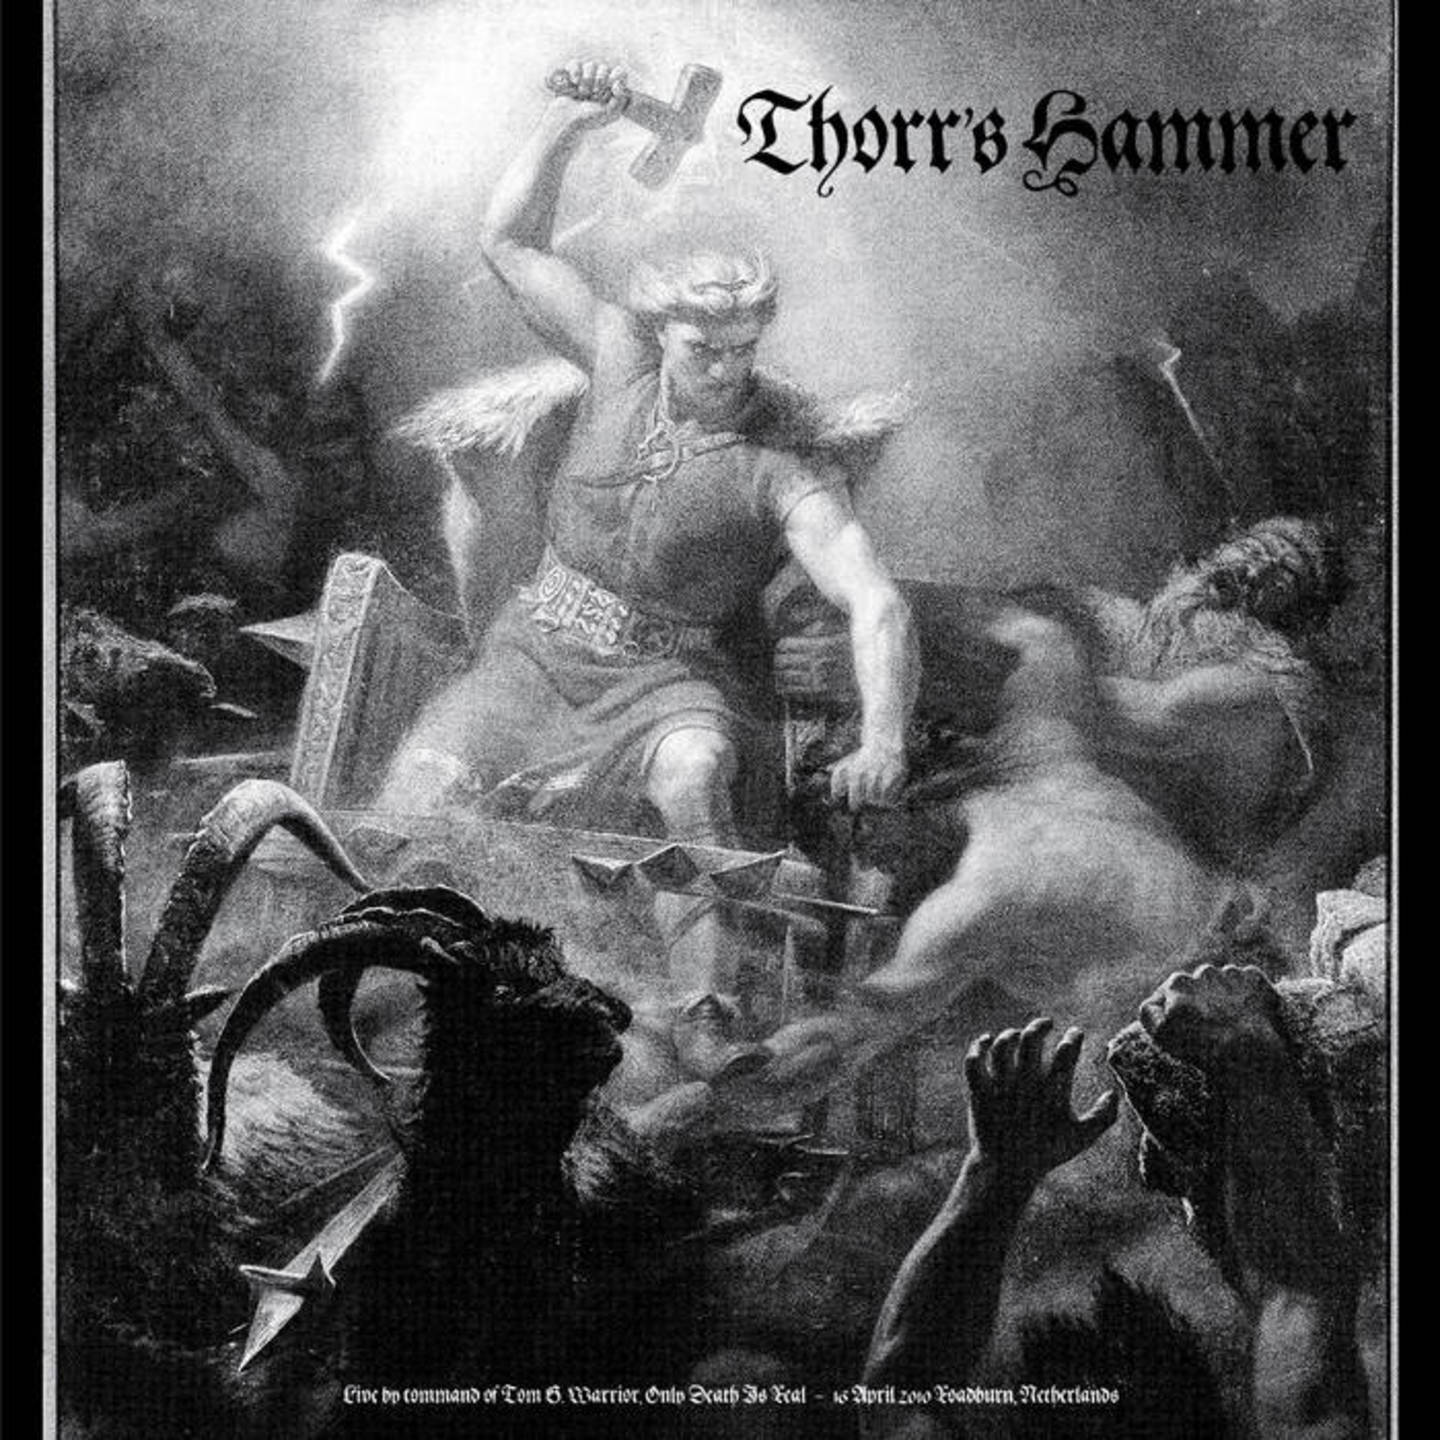 THORRS HAMMER - Live By Command of Tom G. Warrior LP